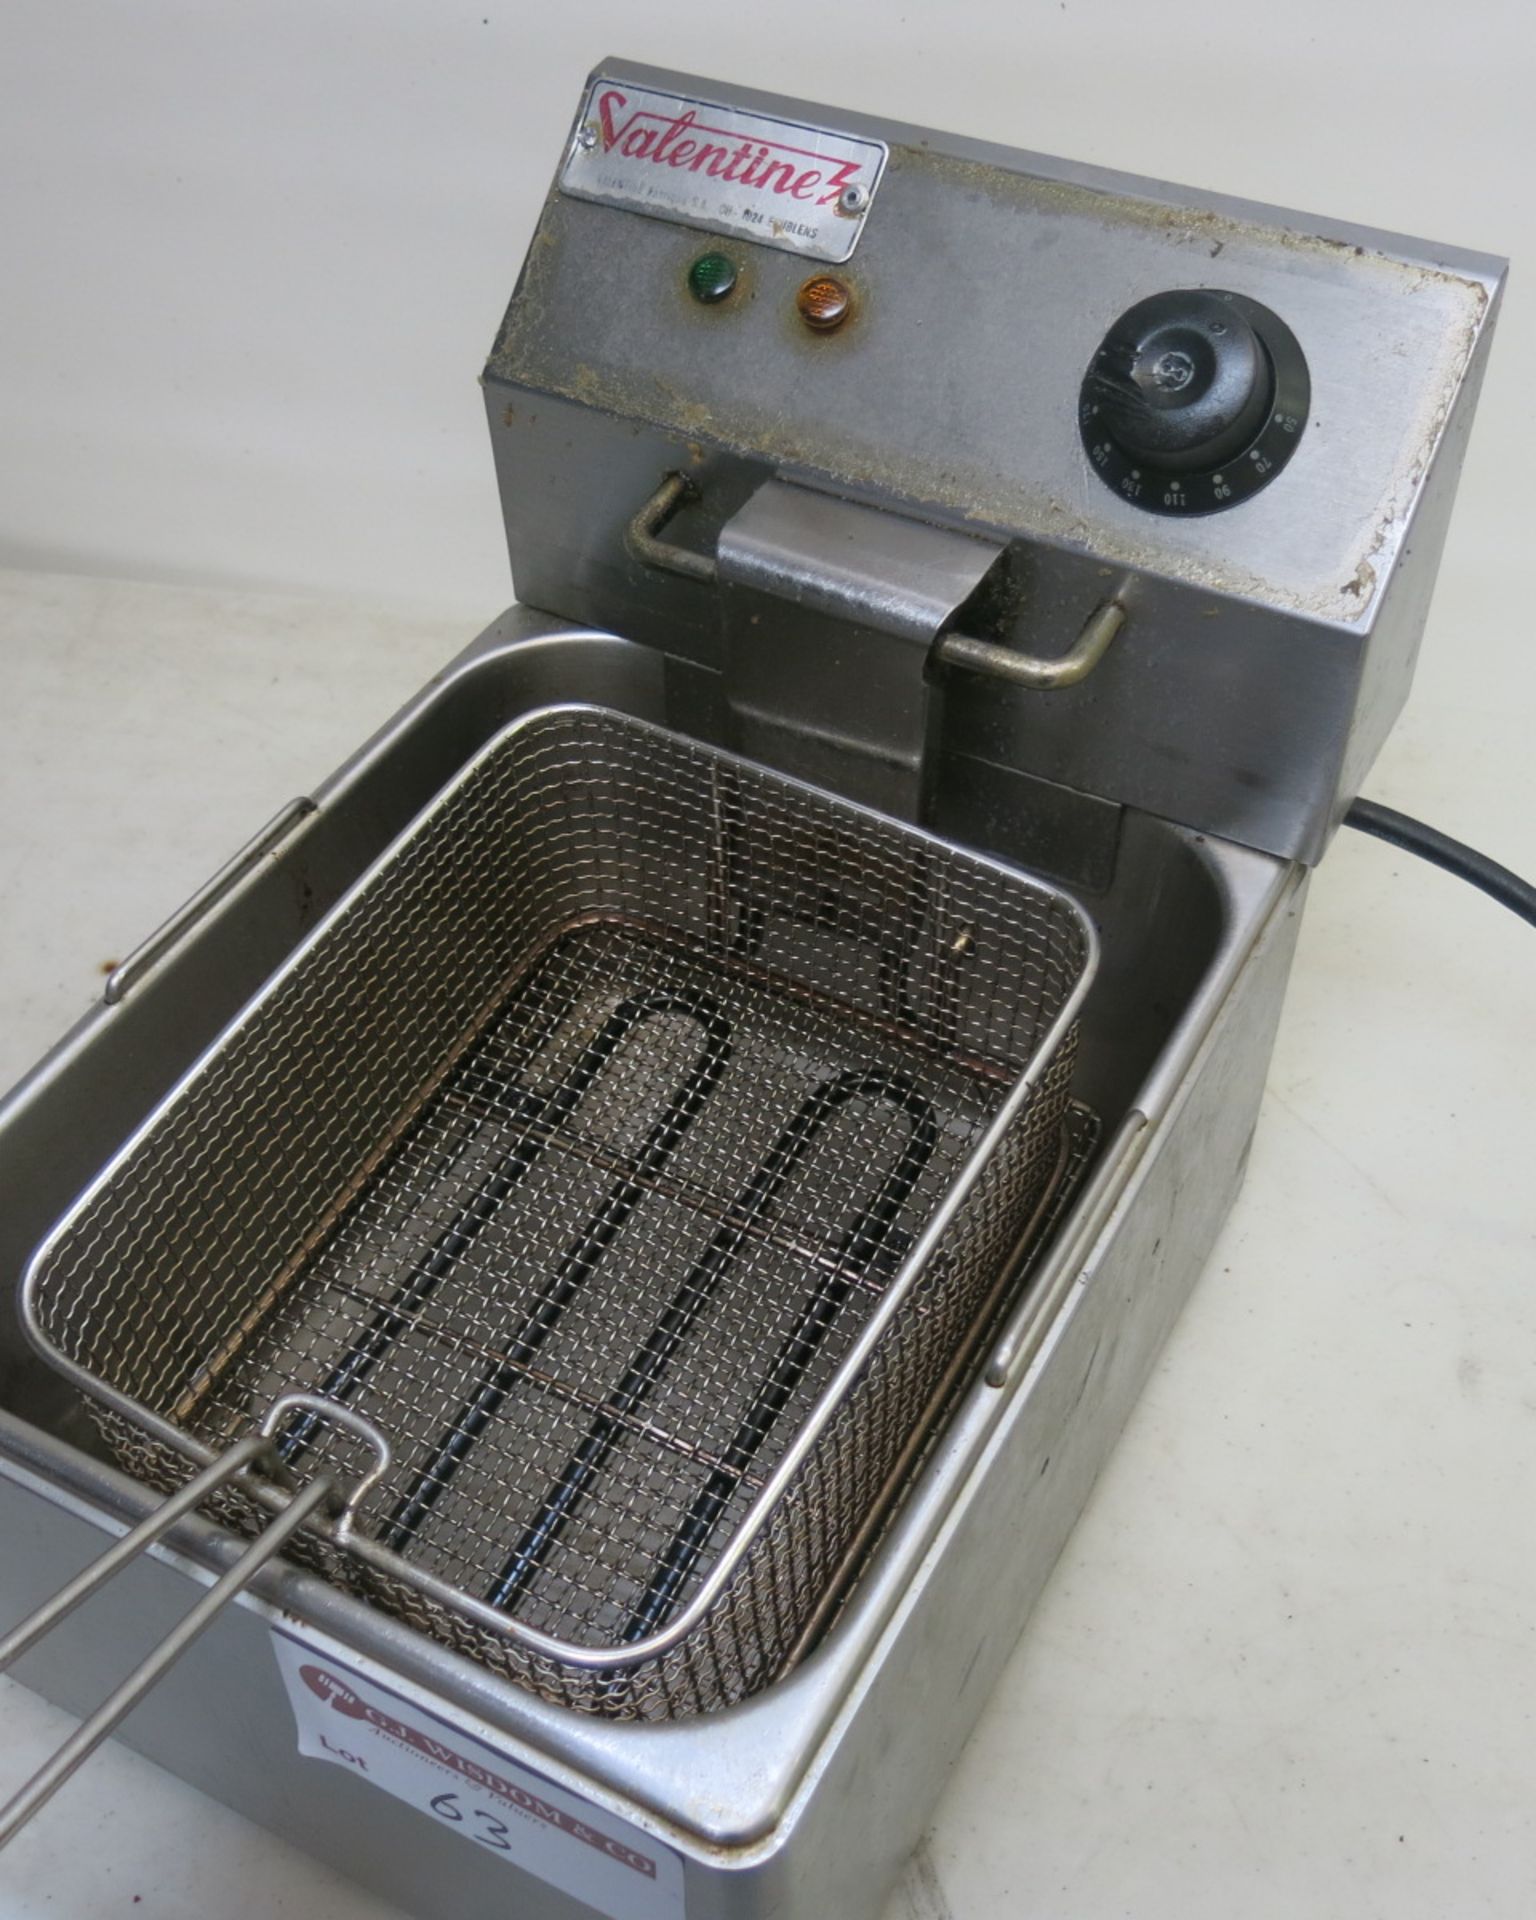 Valentine Table Top Deep Fat Fryer (For Spares or Repair). - Image 2 of 3